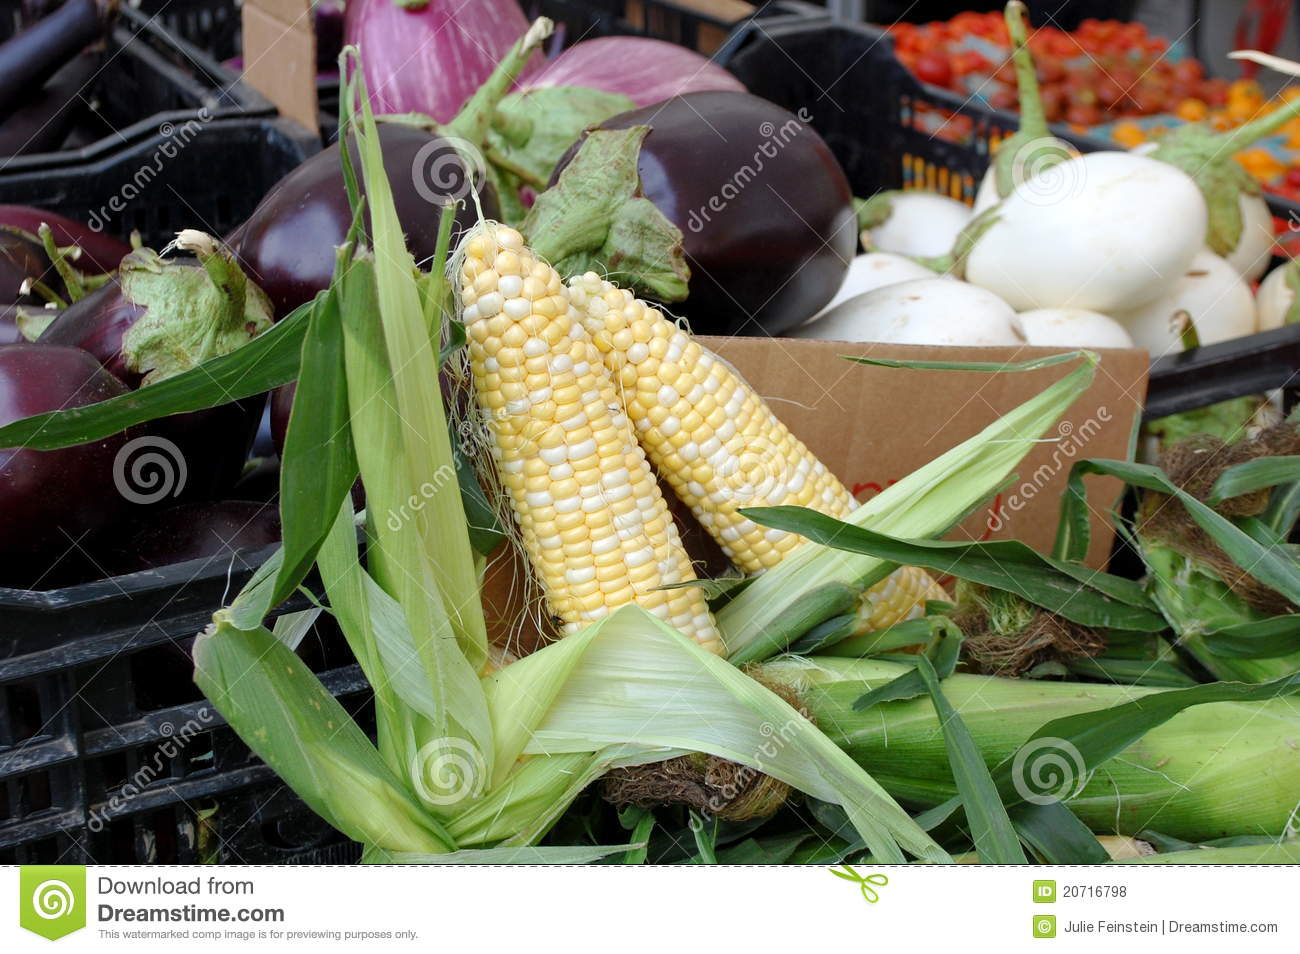 Fresh Summer Vegetables For Sale Royalty Free Stock Photos   Image